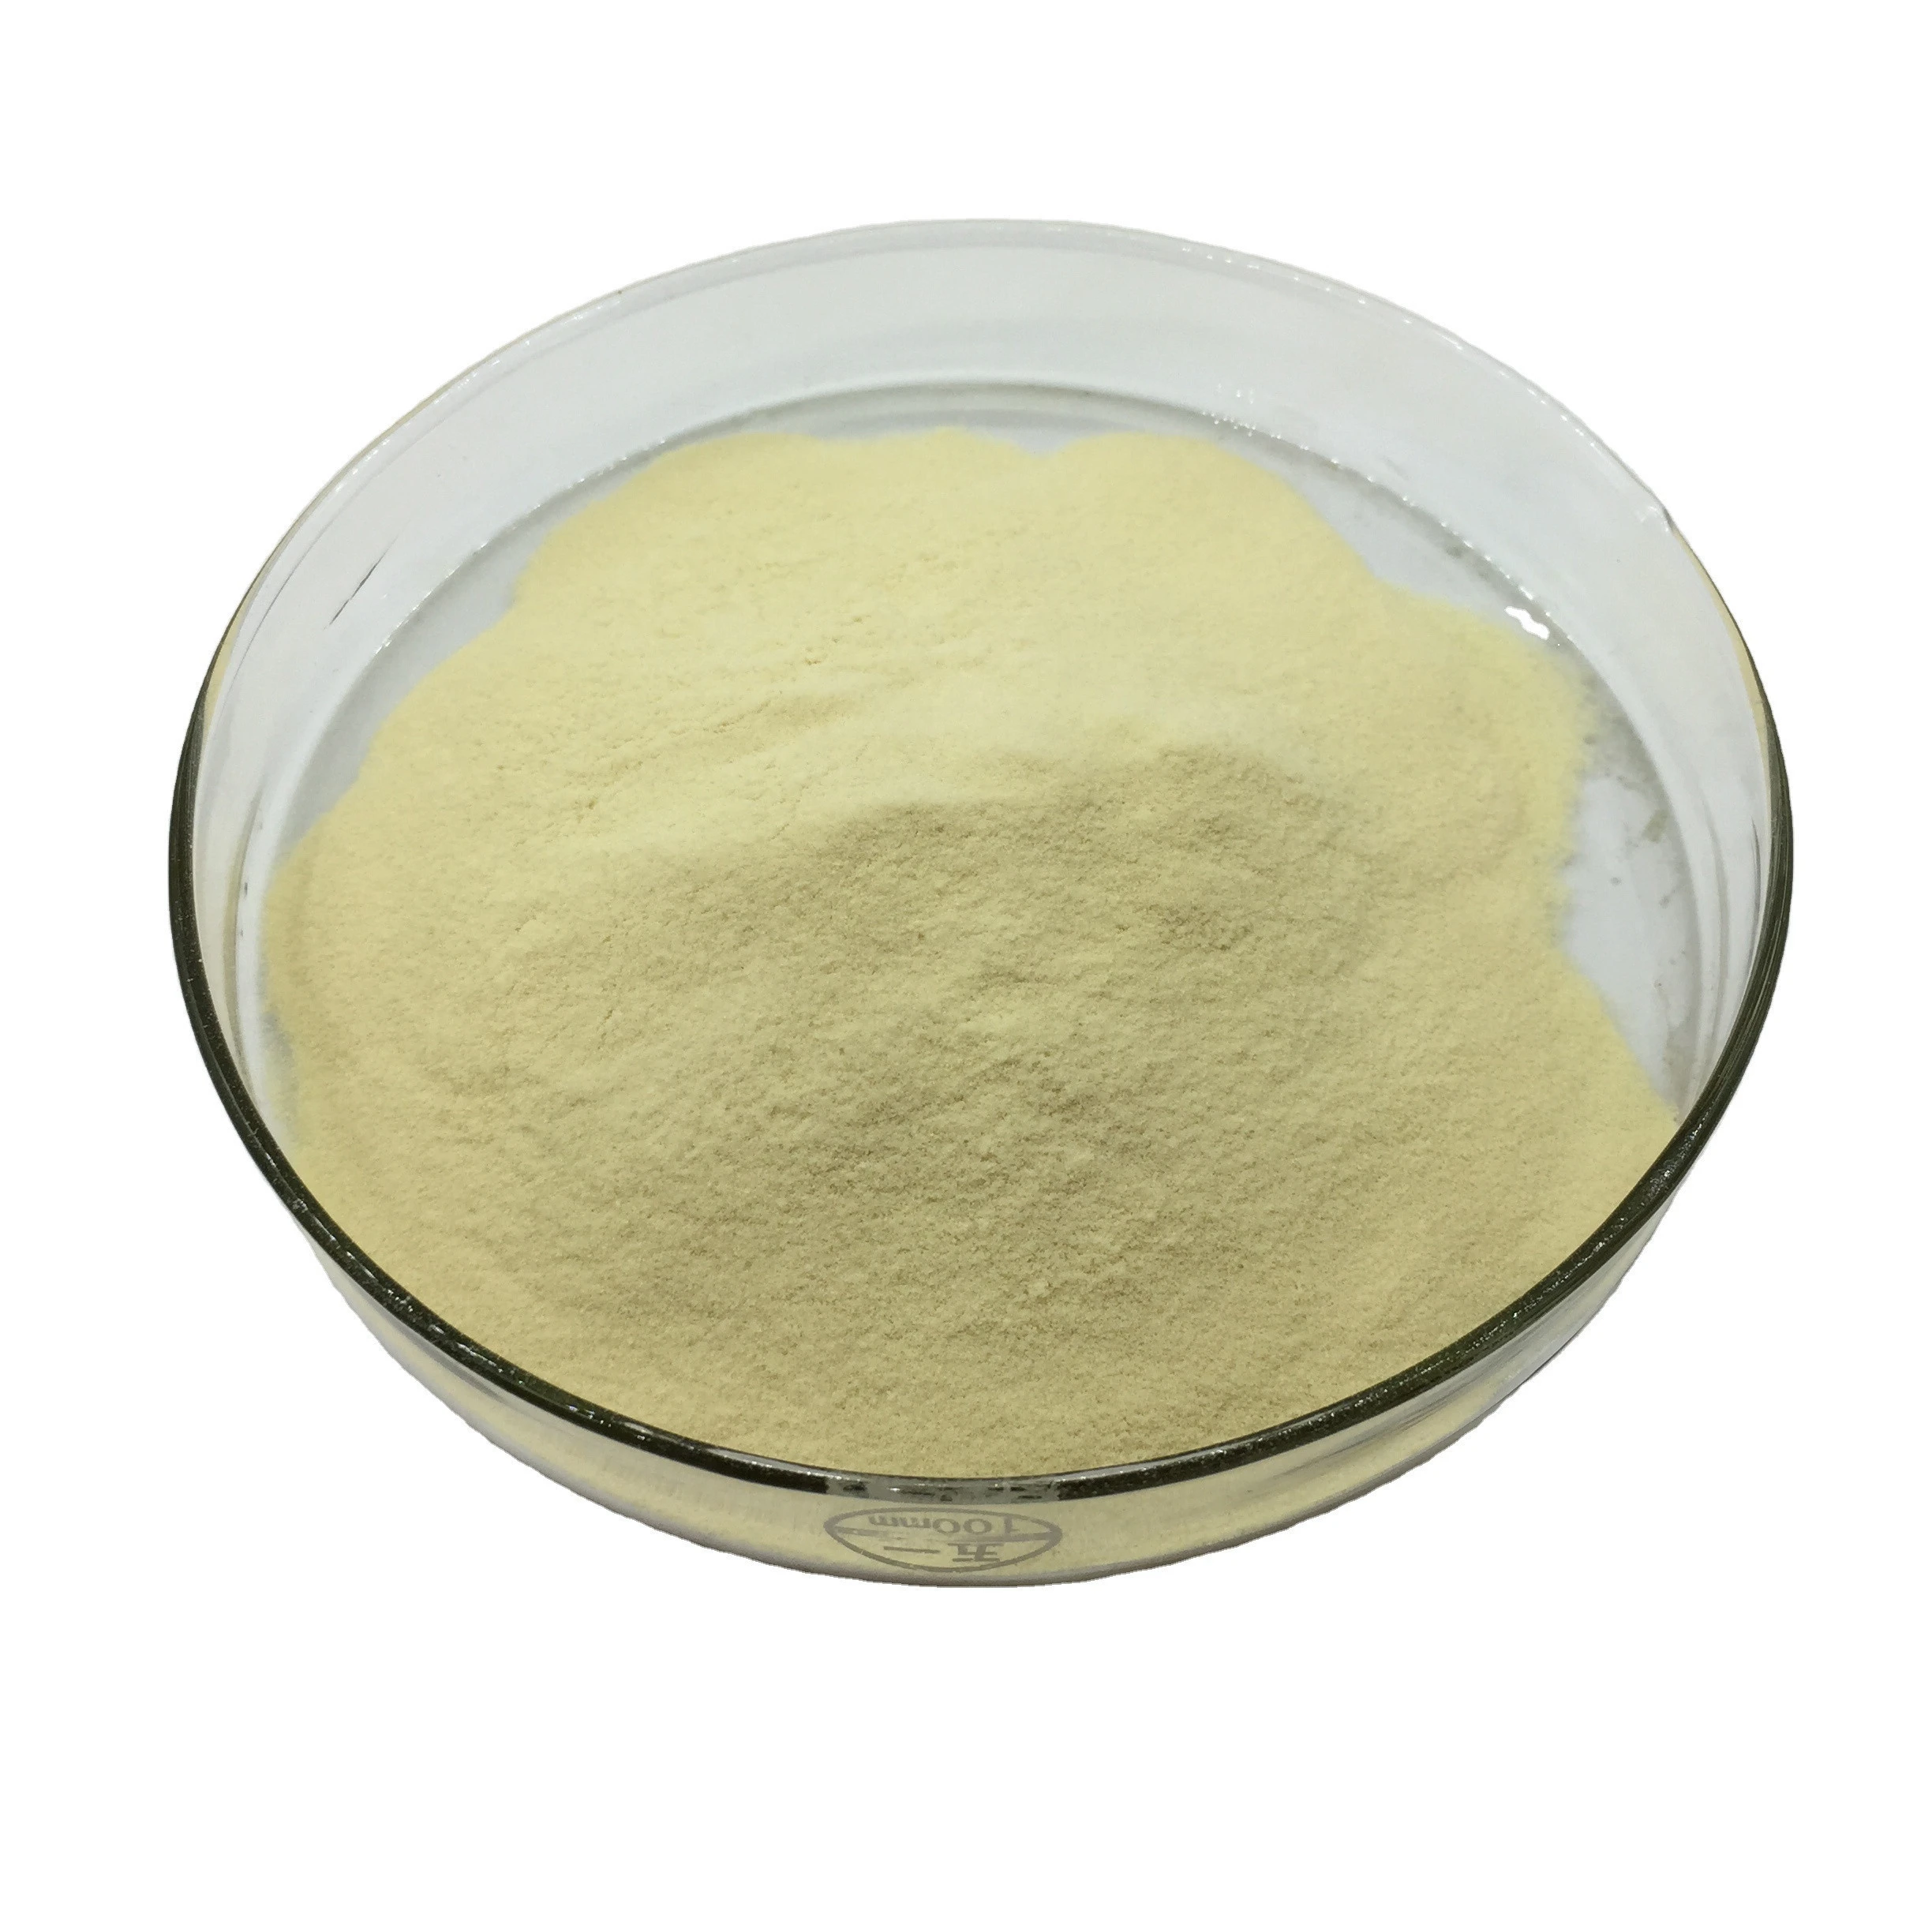 Pure Soy Peptide Powder Soybean Peptide Powder Functional and Health Food